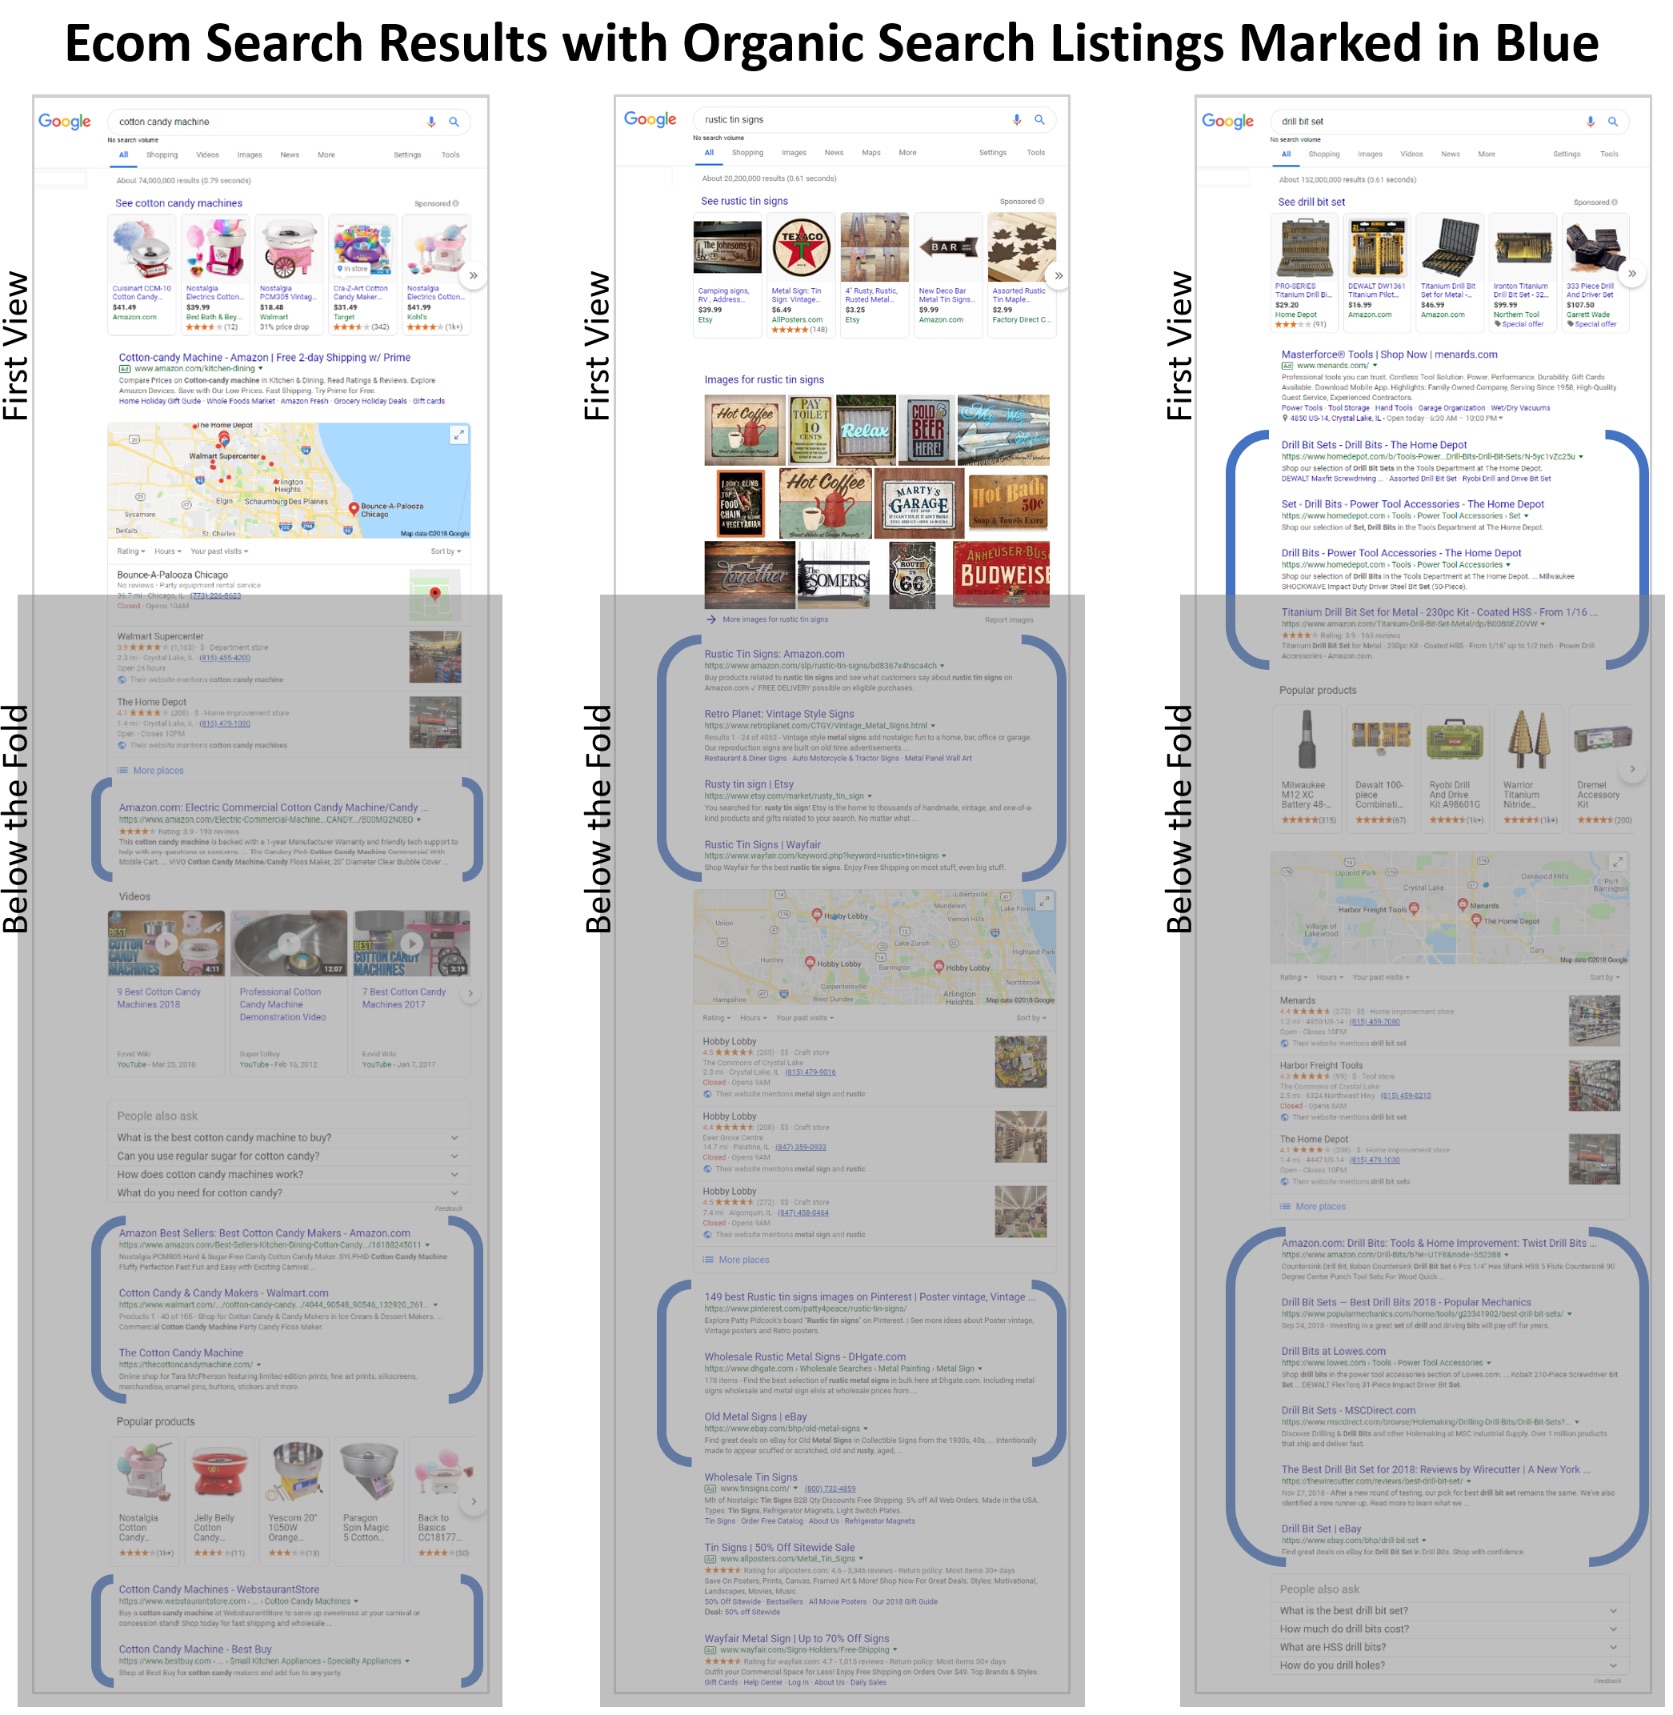 Traditional desktop search is changing, too. Search results produce more ads, images, and videos. <em>Click image to enlarge.</em>